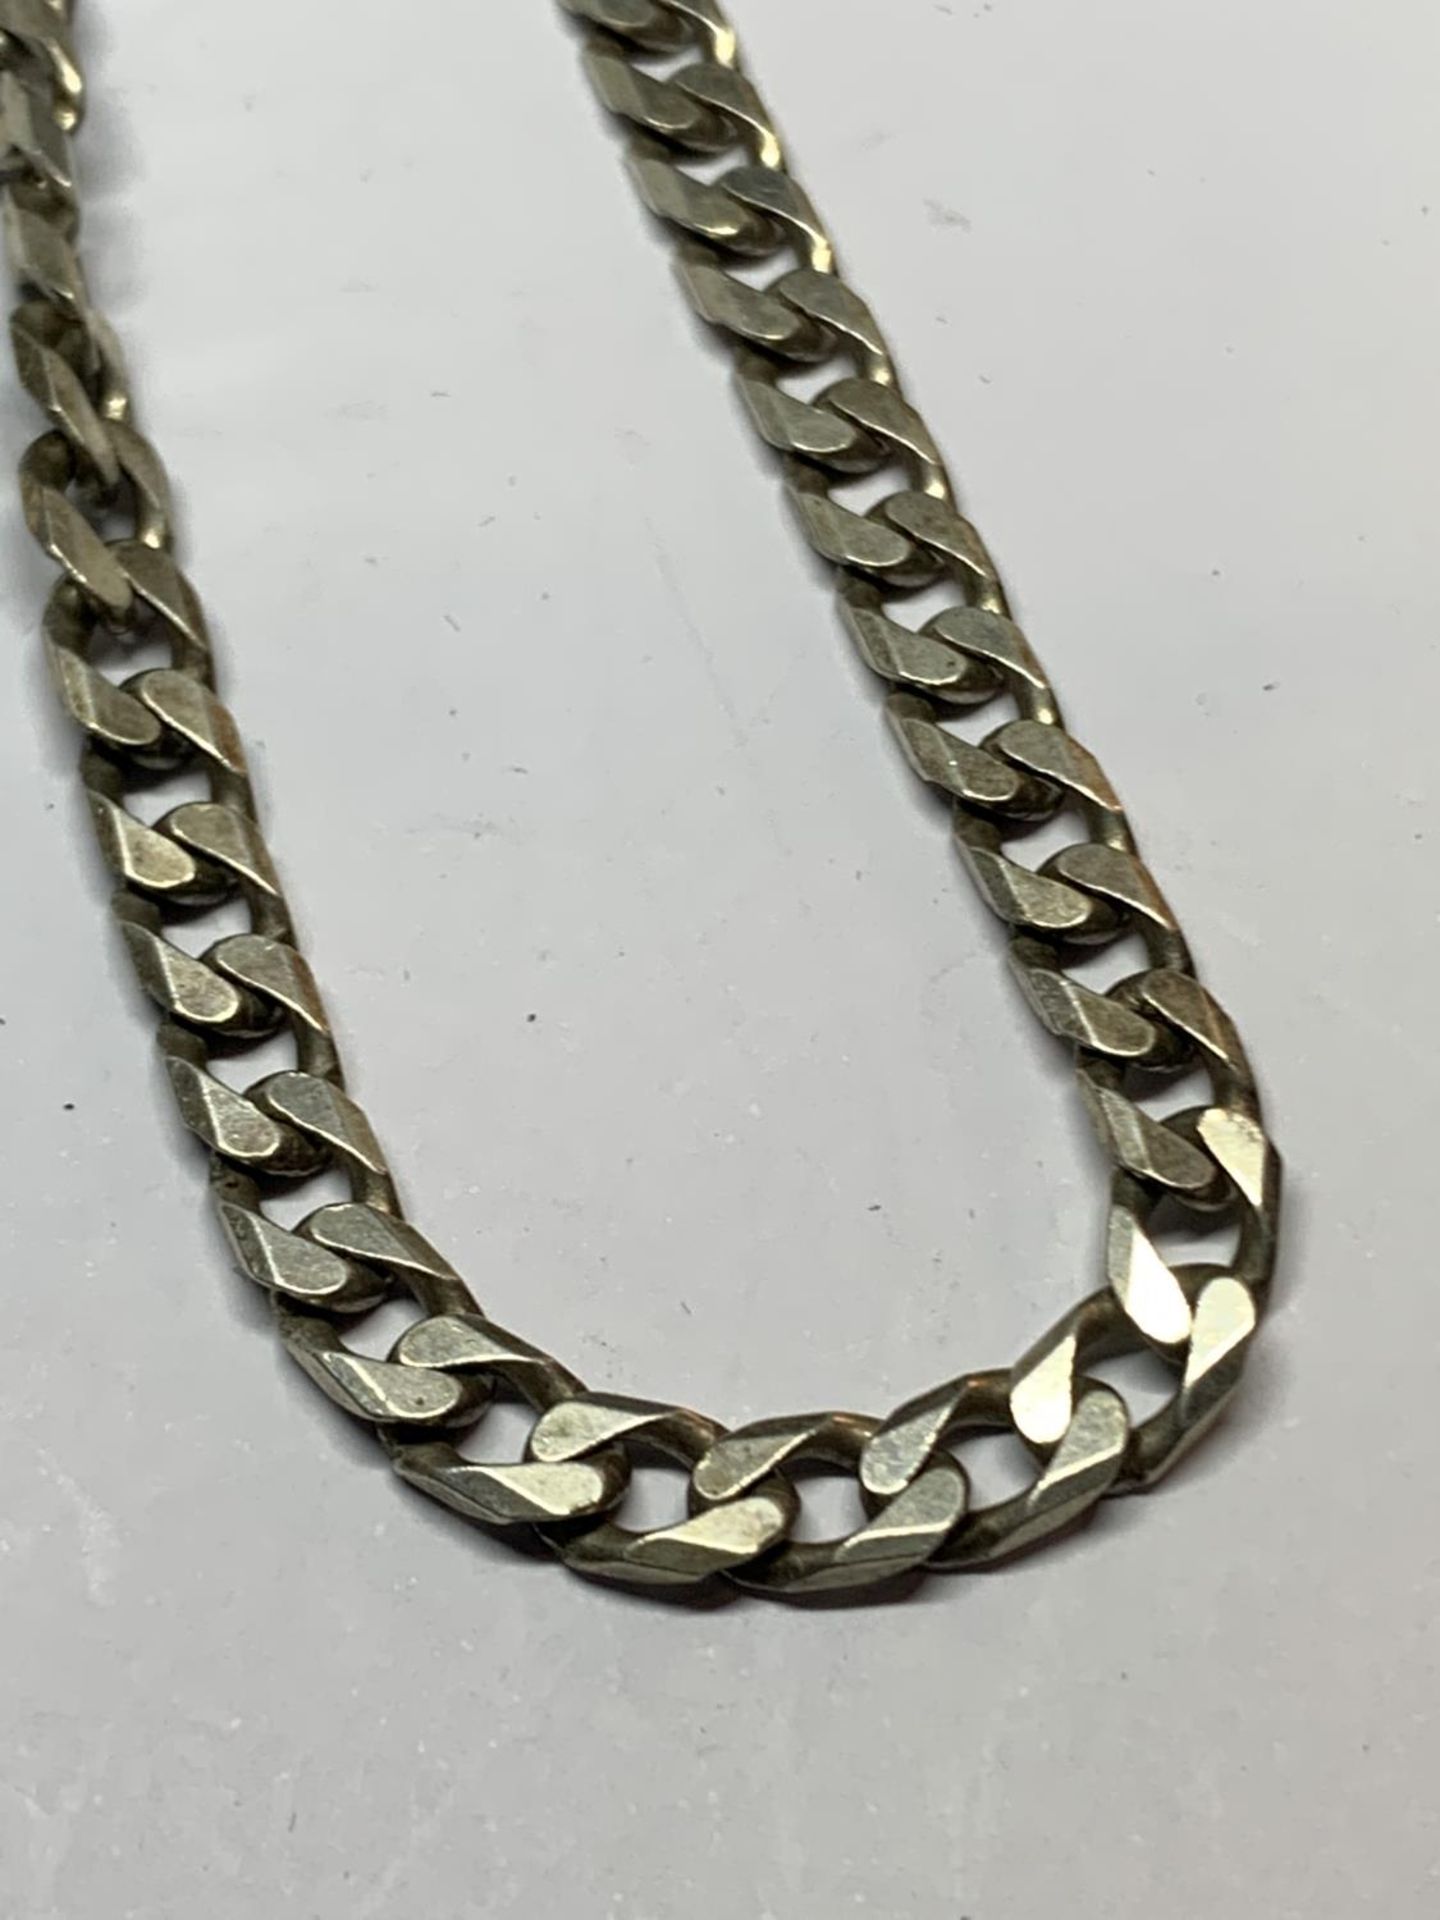 A 20" SILVER FLAT LINK NECK CHAIN - Image 2 of 3